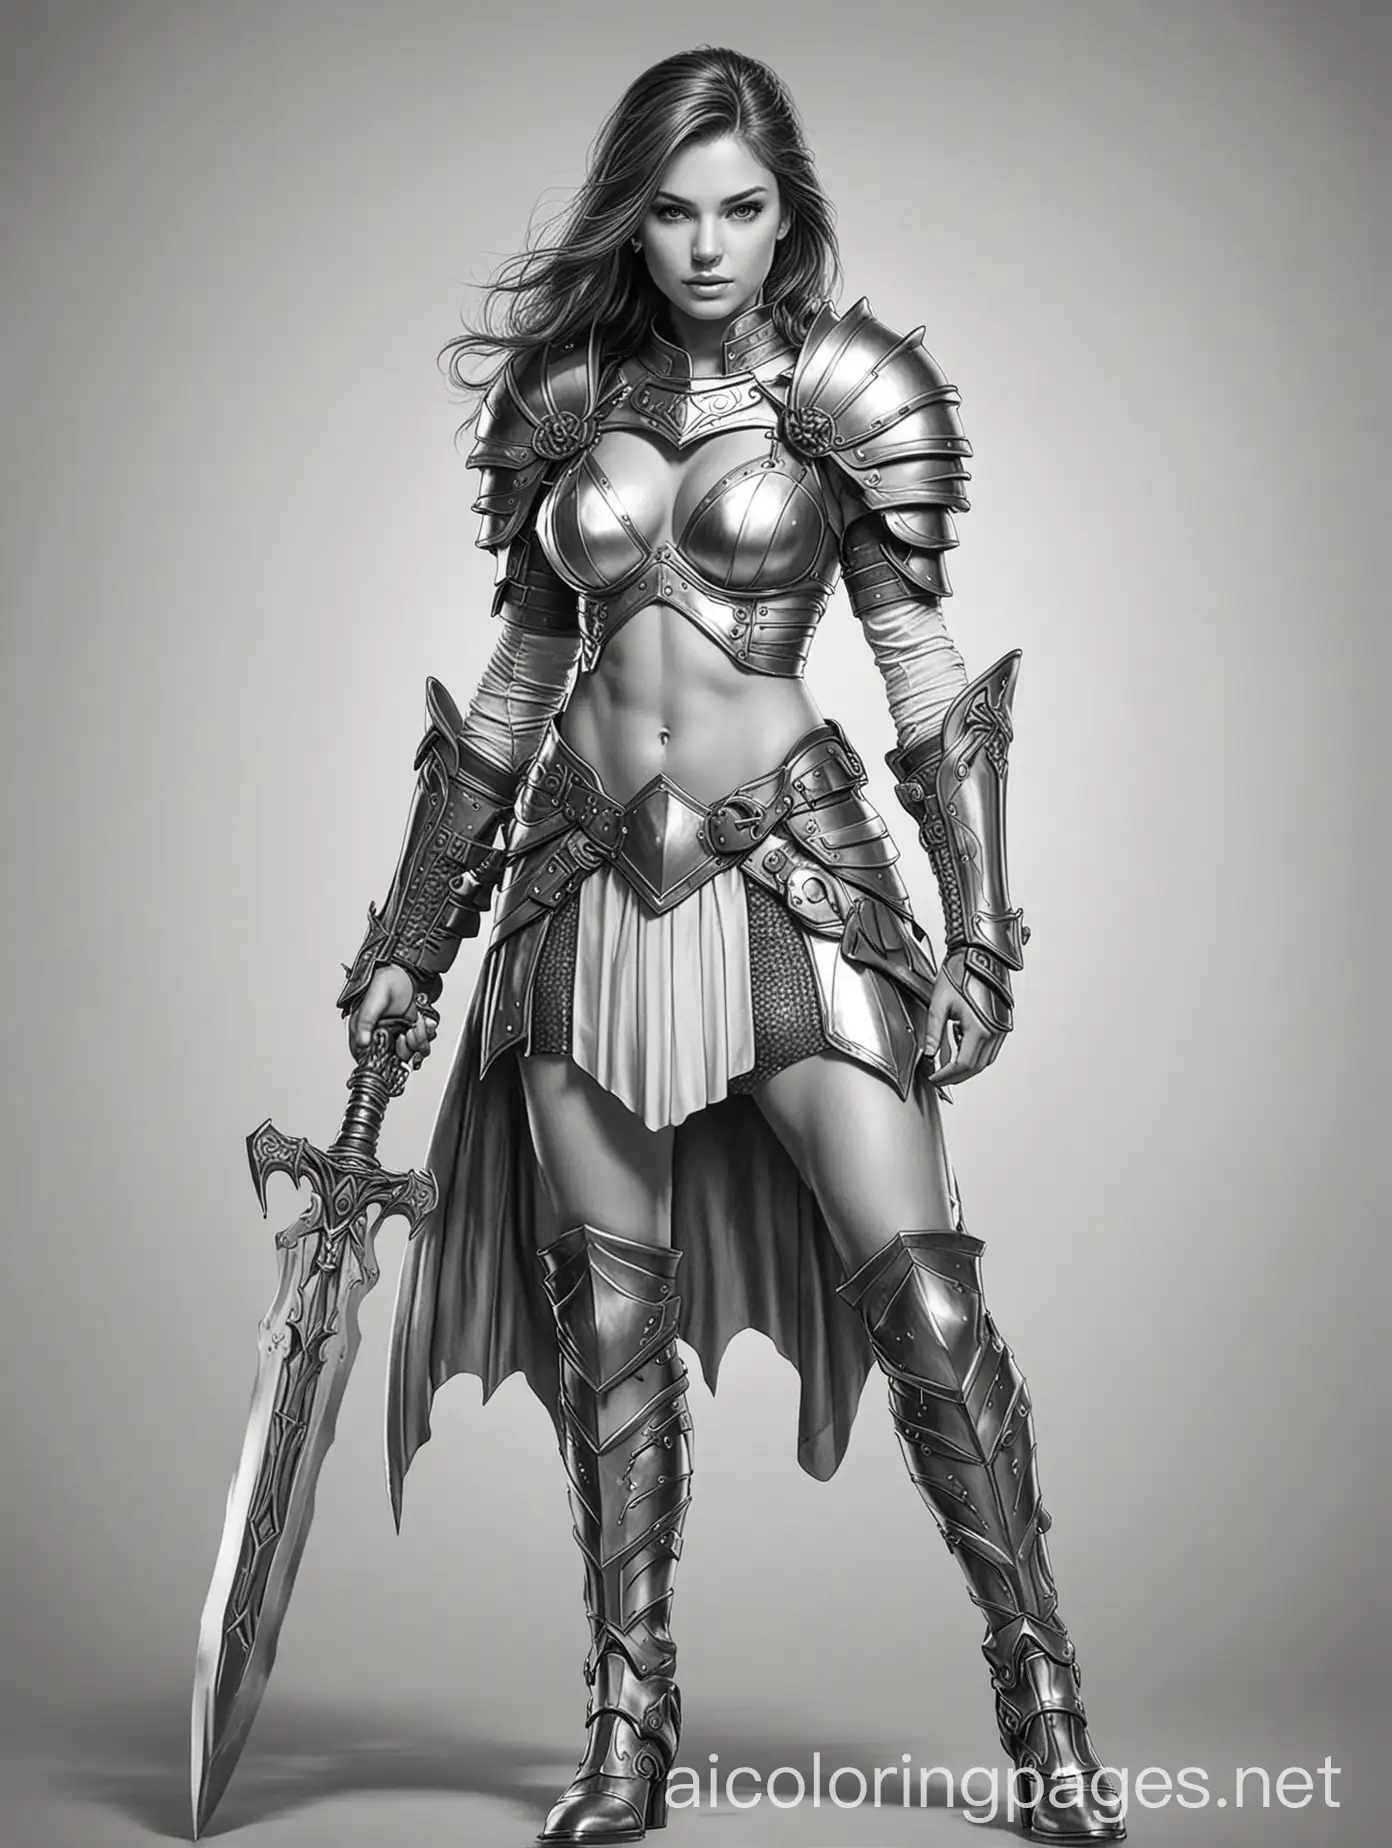 line art, outline, black and white drawing, to color, Coloring Book, ColoringBookAF, realistic, heroic fantasy, full body shot, young 14 year old teen sexy warrior woman, sexy light armor, big metal boots, metal skirt, metal bra, pauldrons, ready to fight posing, Coloring Page, black and white, line art, white background, Simplicity, Ample White Space. The background of the coloring page is plain white to make it easy for young children to color within the lines. The outlines of all the subjects are easy to distinguish, making it simple for kids to color without too much difficulty